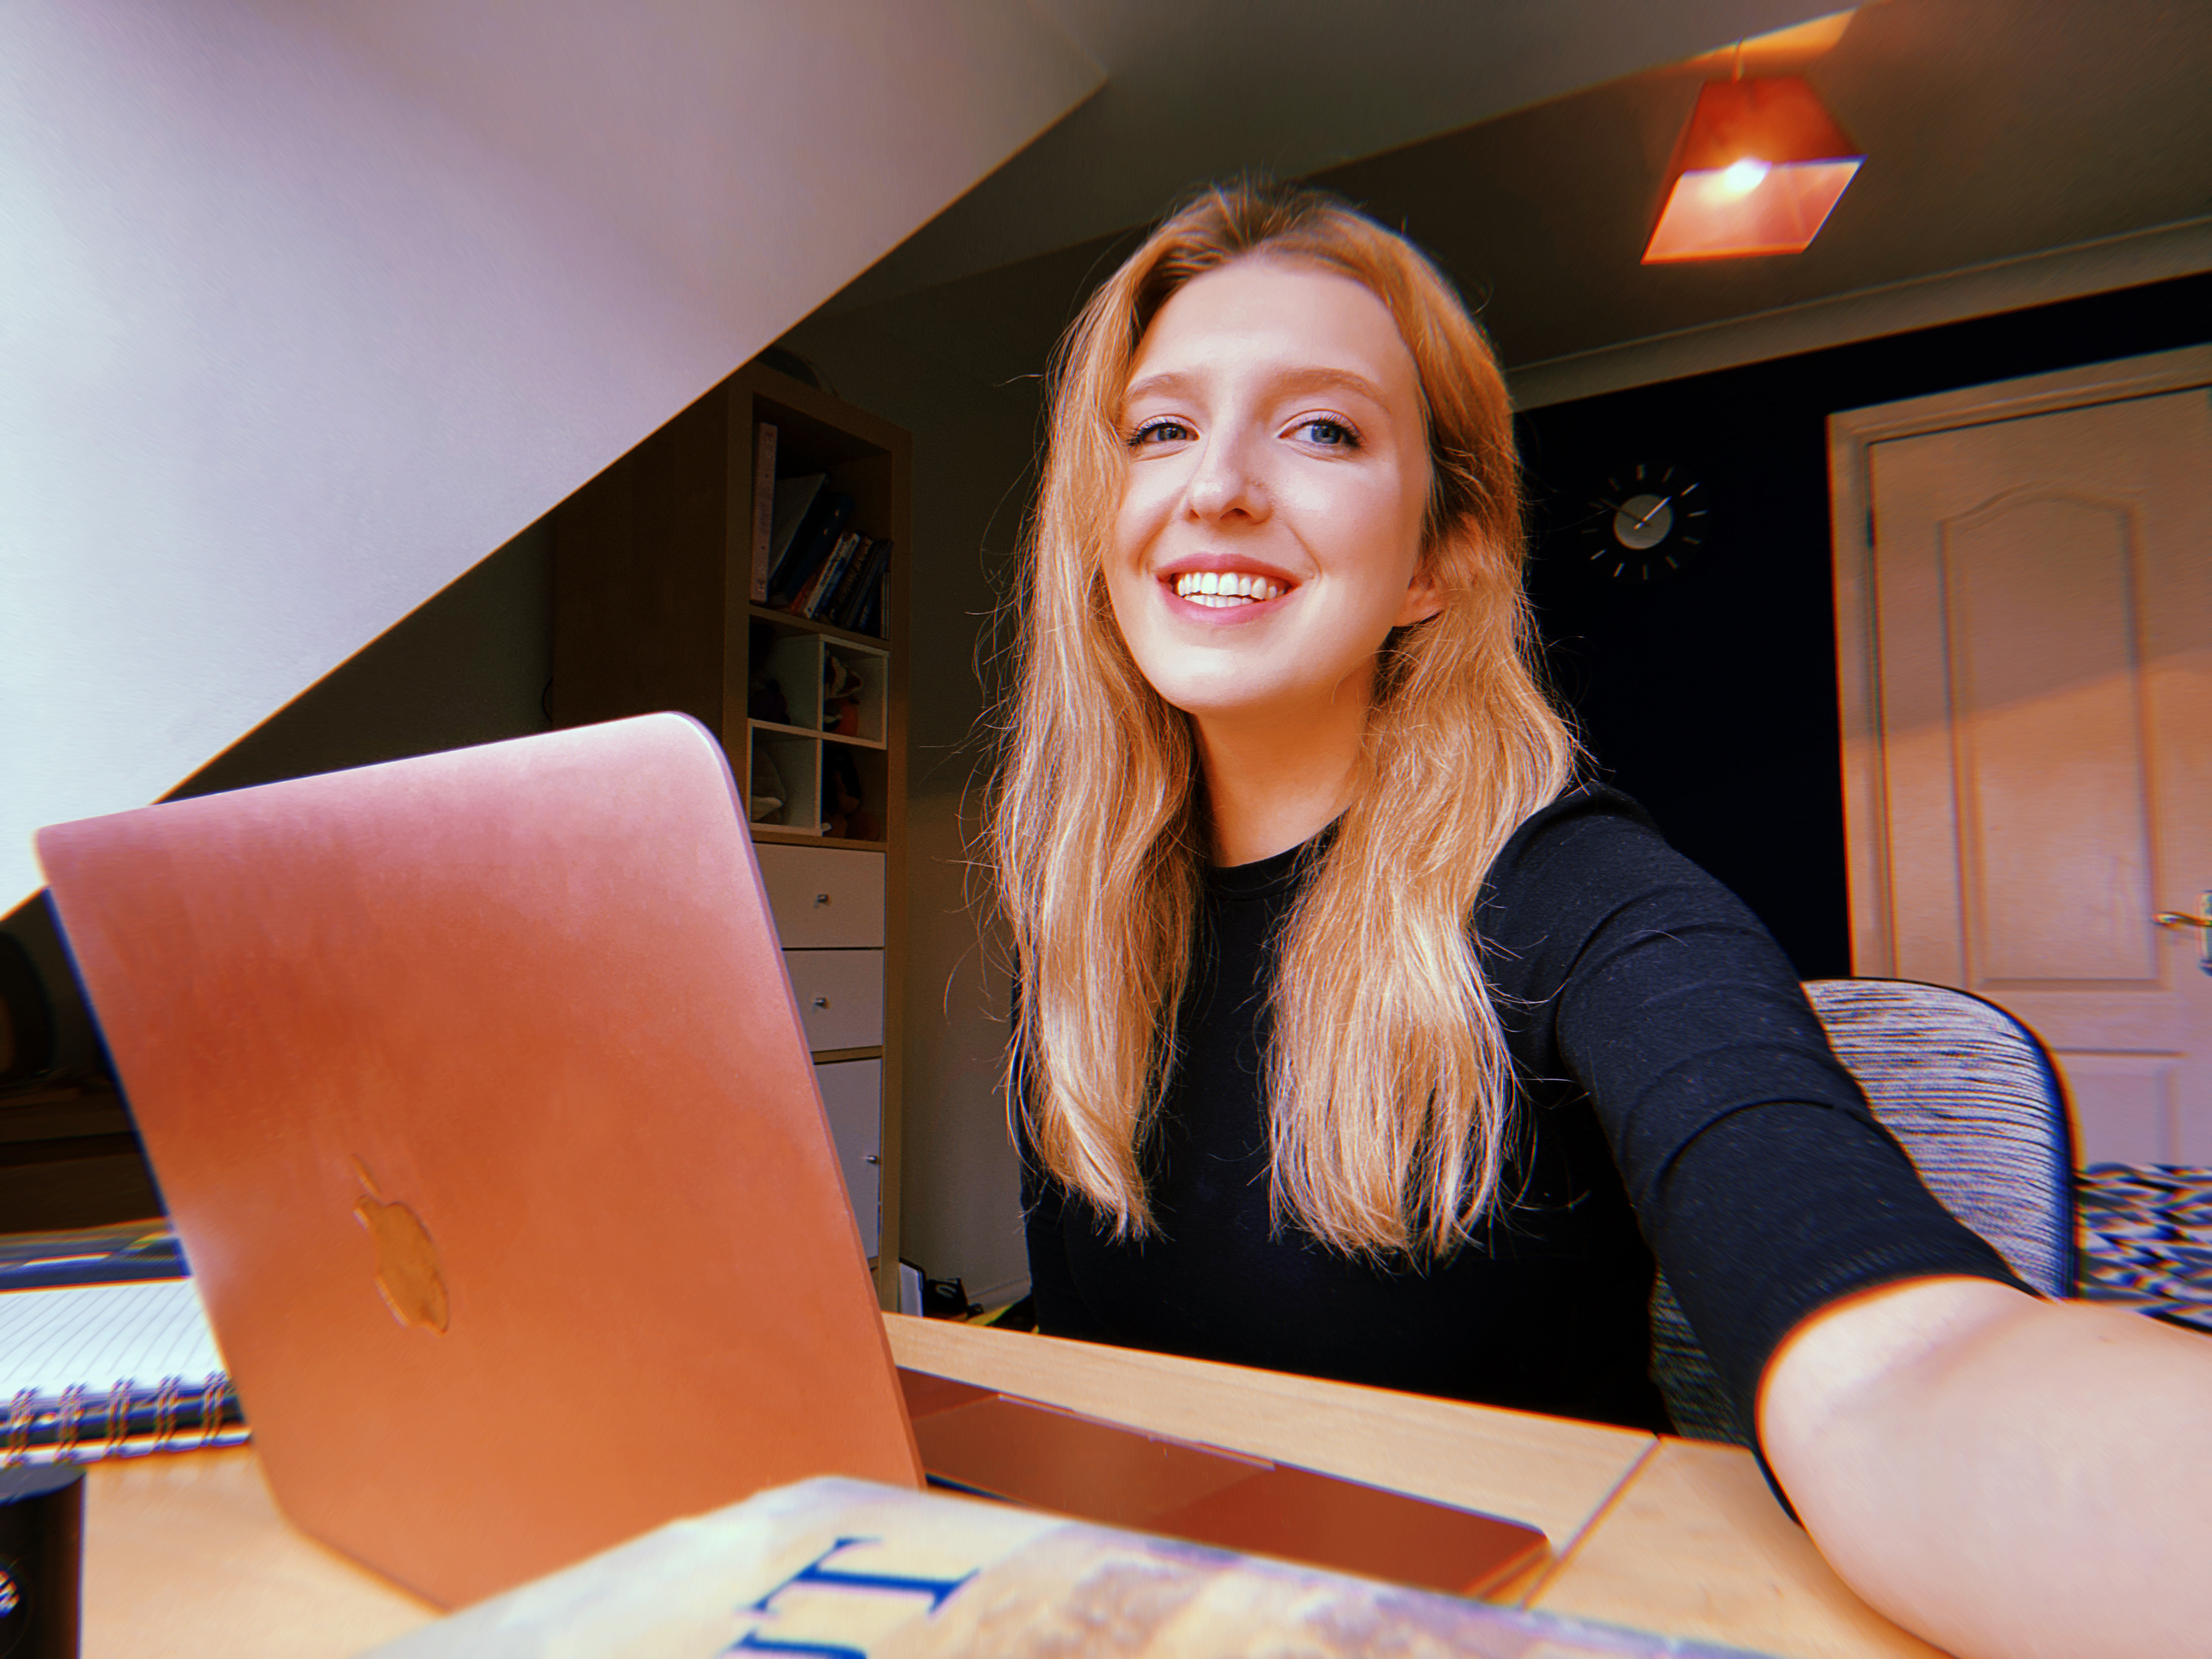 Adele Egeland, remote Absolute intern working from home